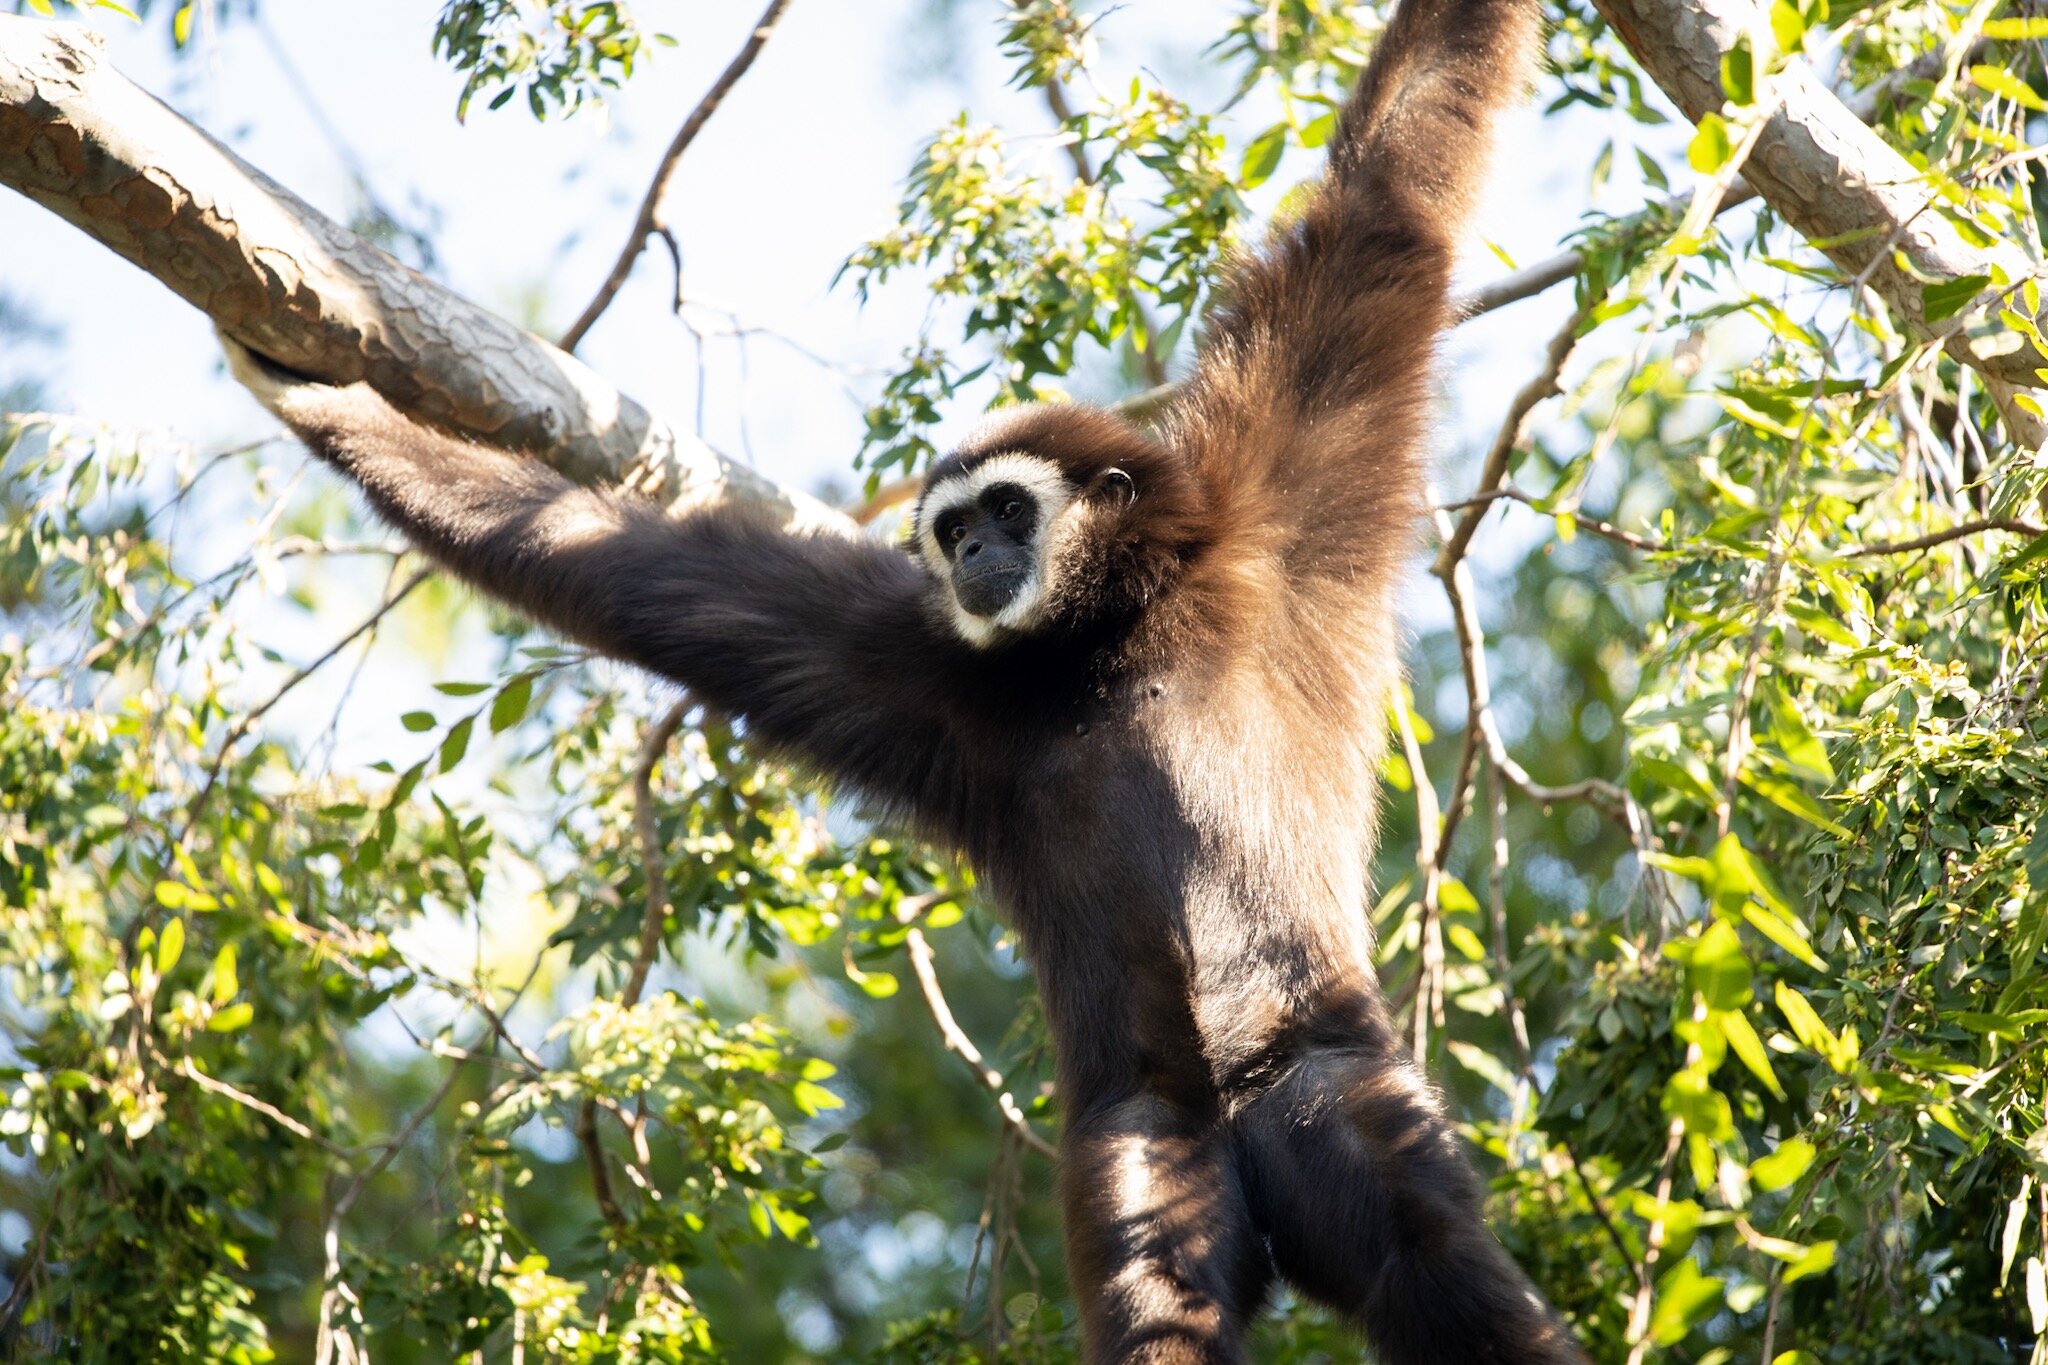  And lastly a gibbon. These guys are a hoot to watch as they swing around their enclosure. Very popular with the kiddos 